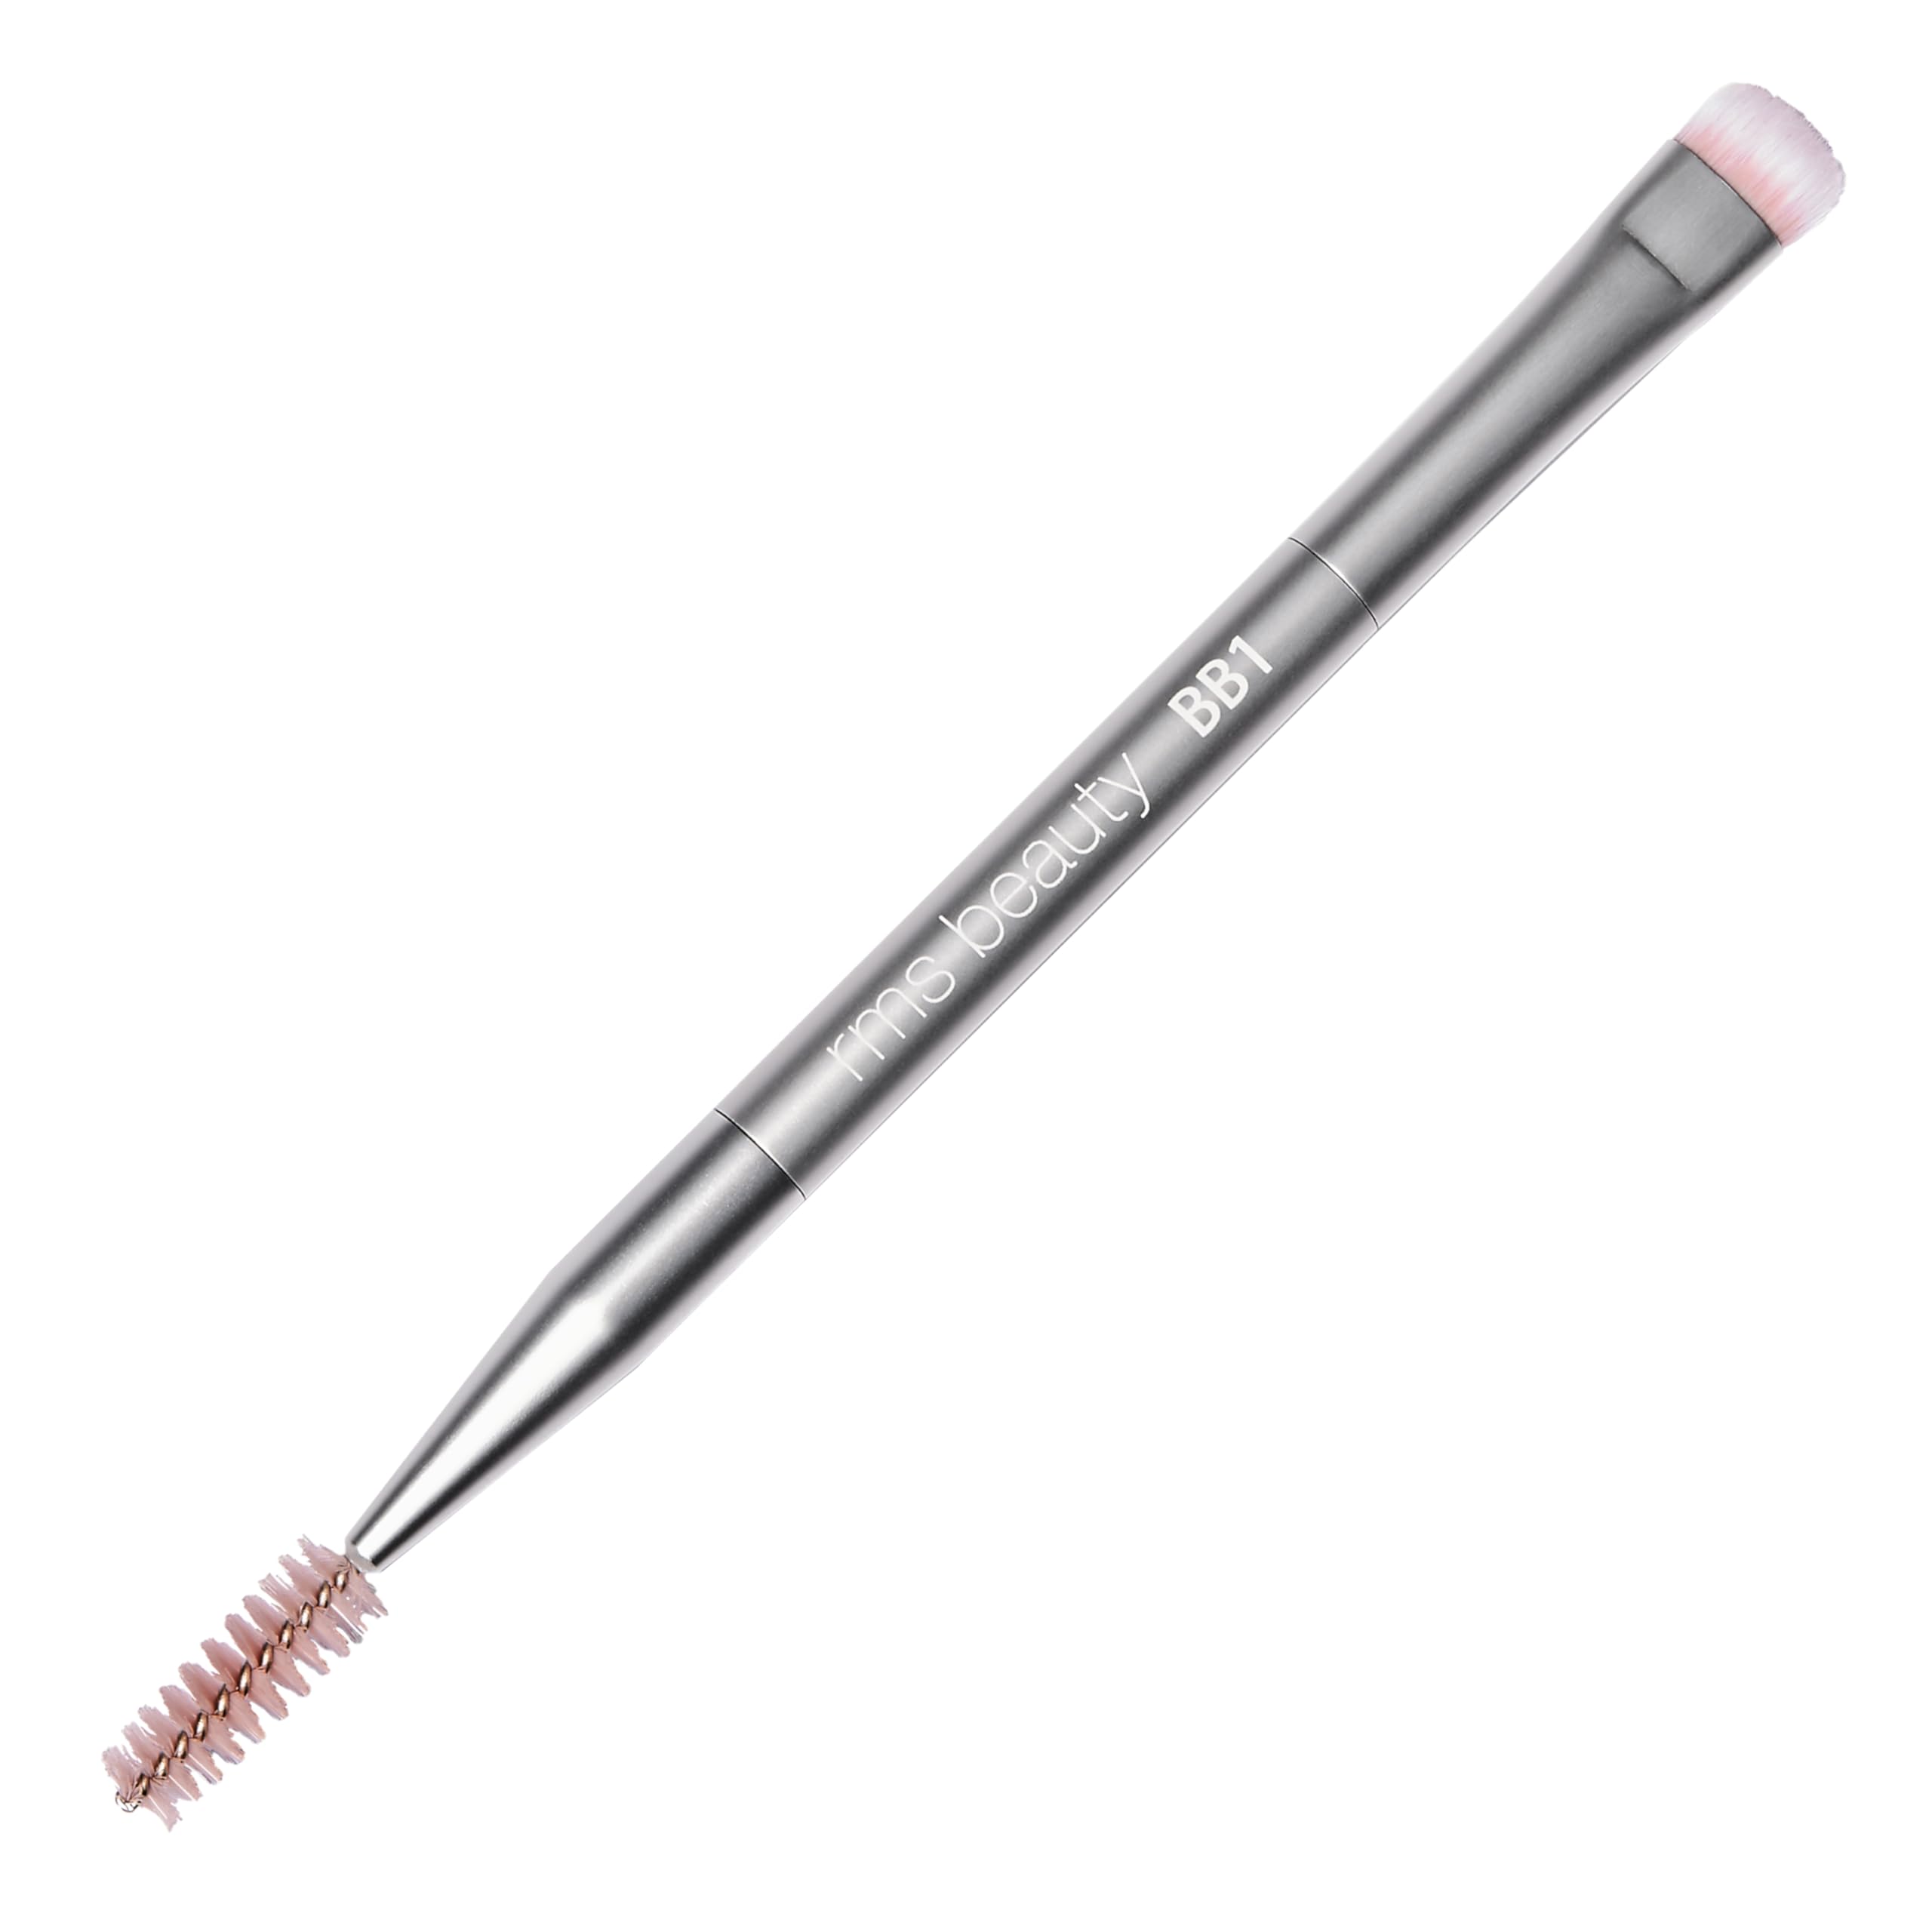 RMS Beauty Back2Brow Brush, RMS Beauty Back2Brow Powder and RMS Beauty Back2Brow Pencil